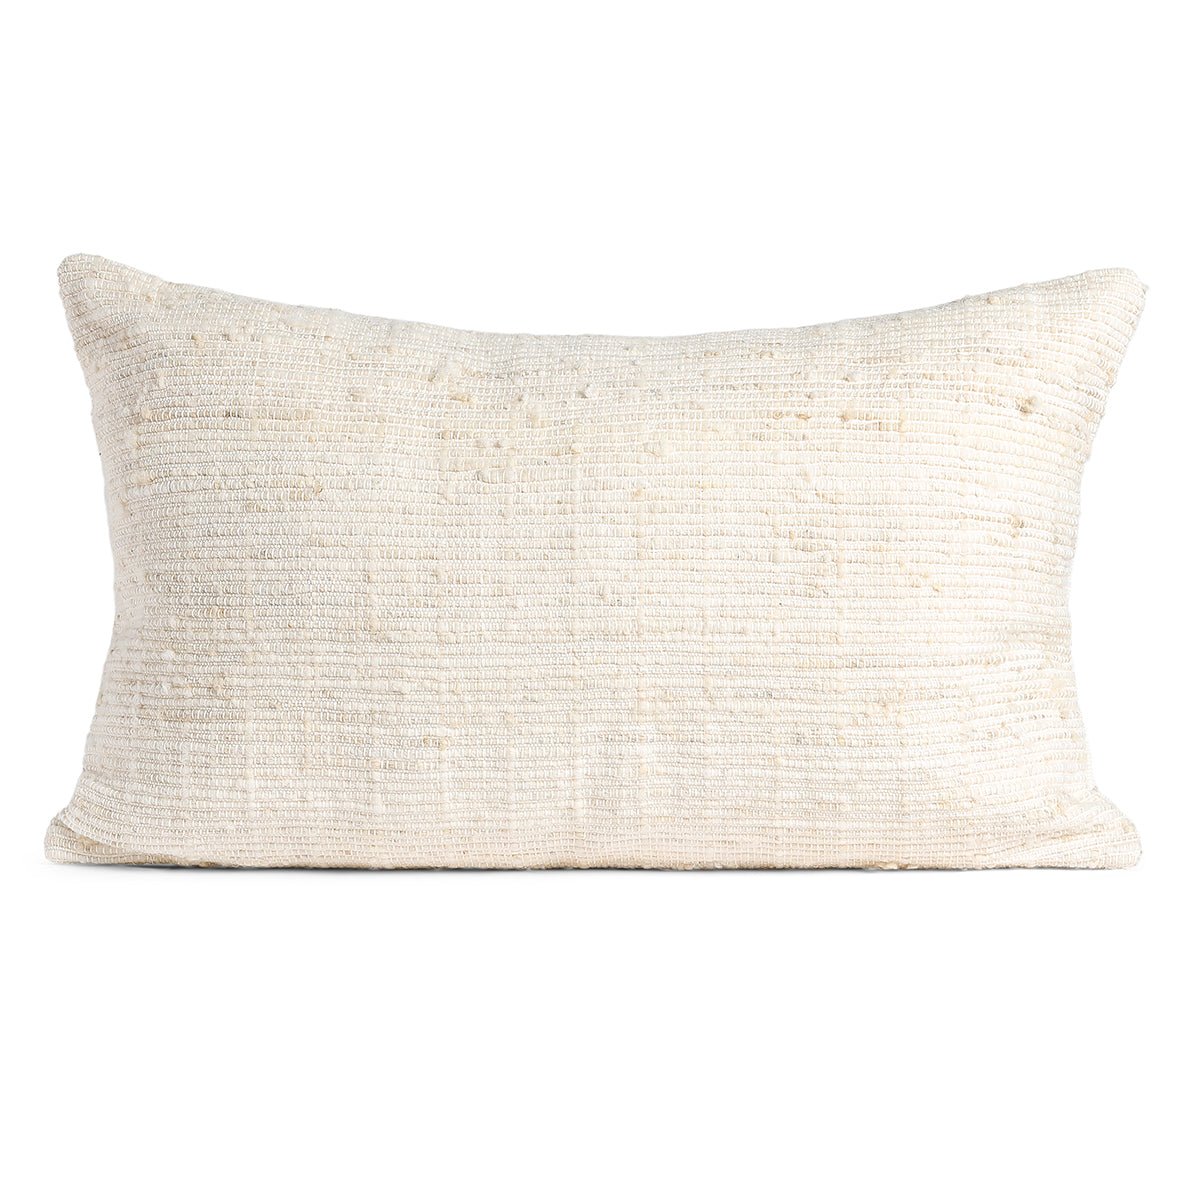 Ivory Medellin Lumbar Pillow with Stripes